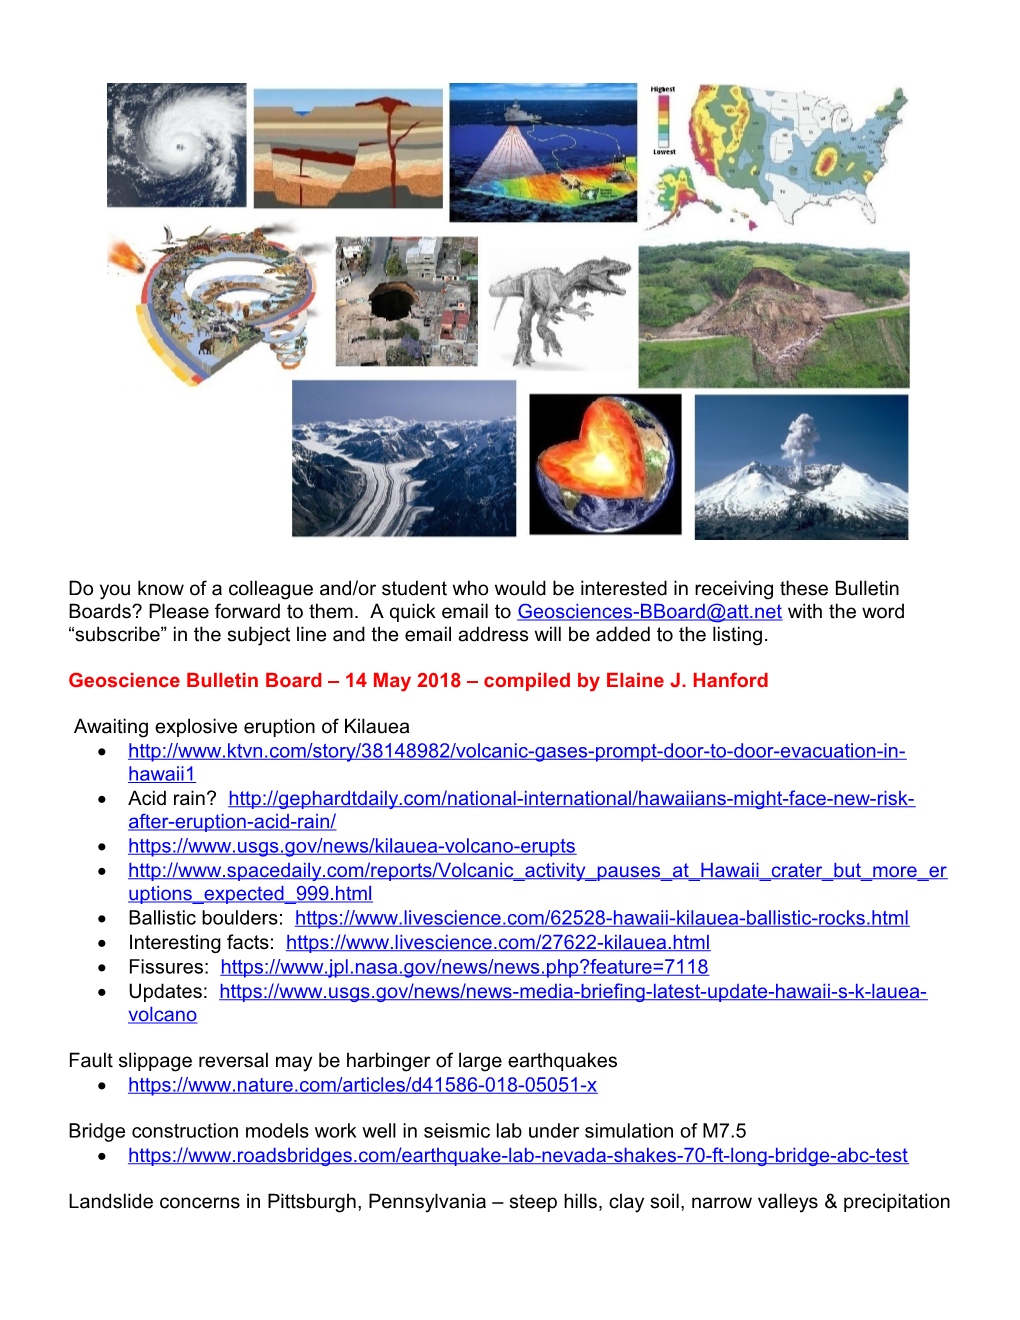 Geoscience Bulletin Board 14 May 2018 Compiled by Elaine J. Hanford